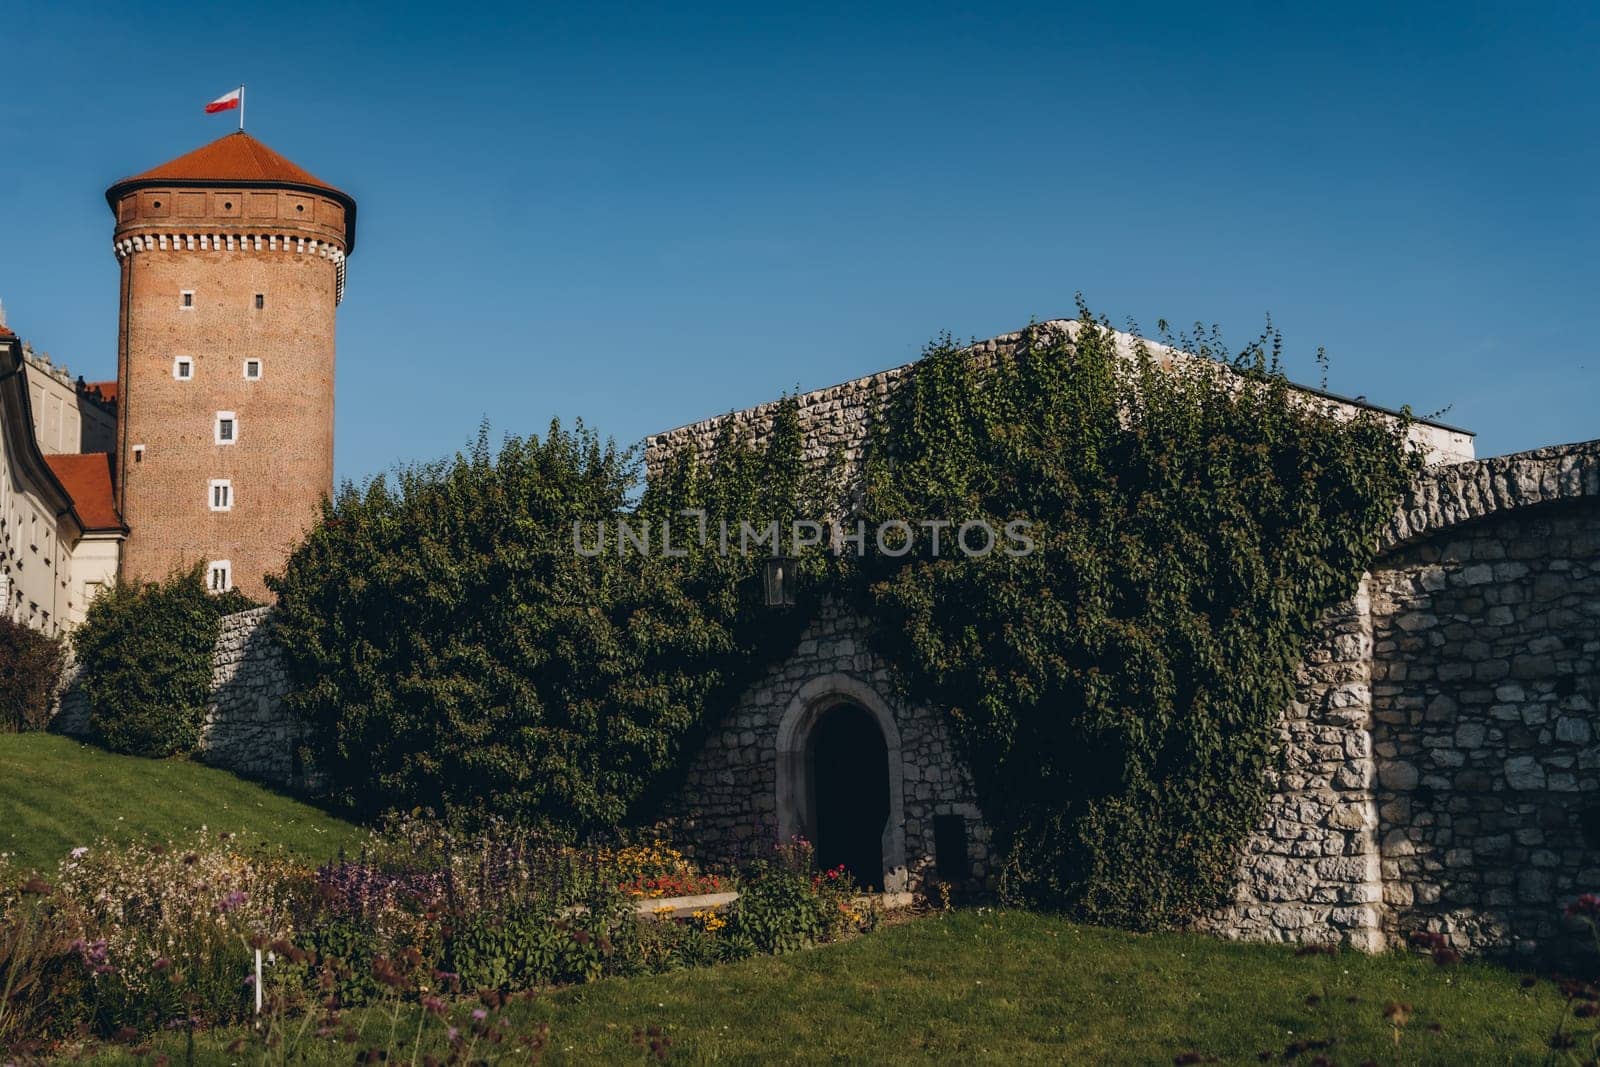 Stone tower and wall, green garden of Wawel Royal Castle complex in Krakow, Poland